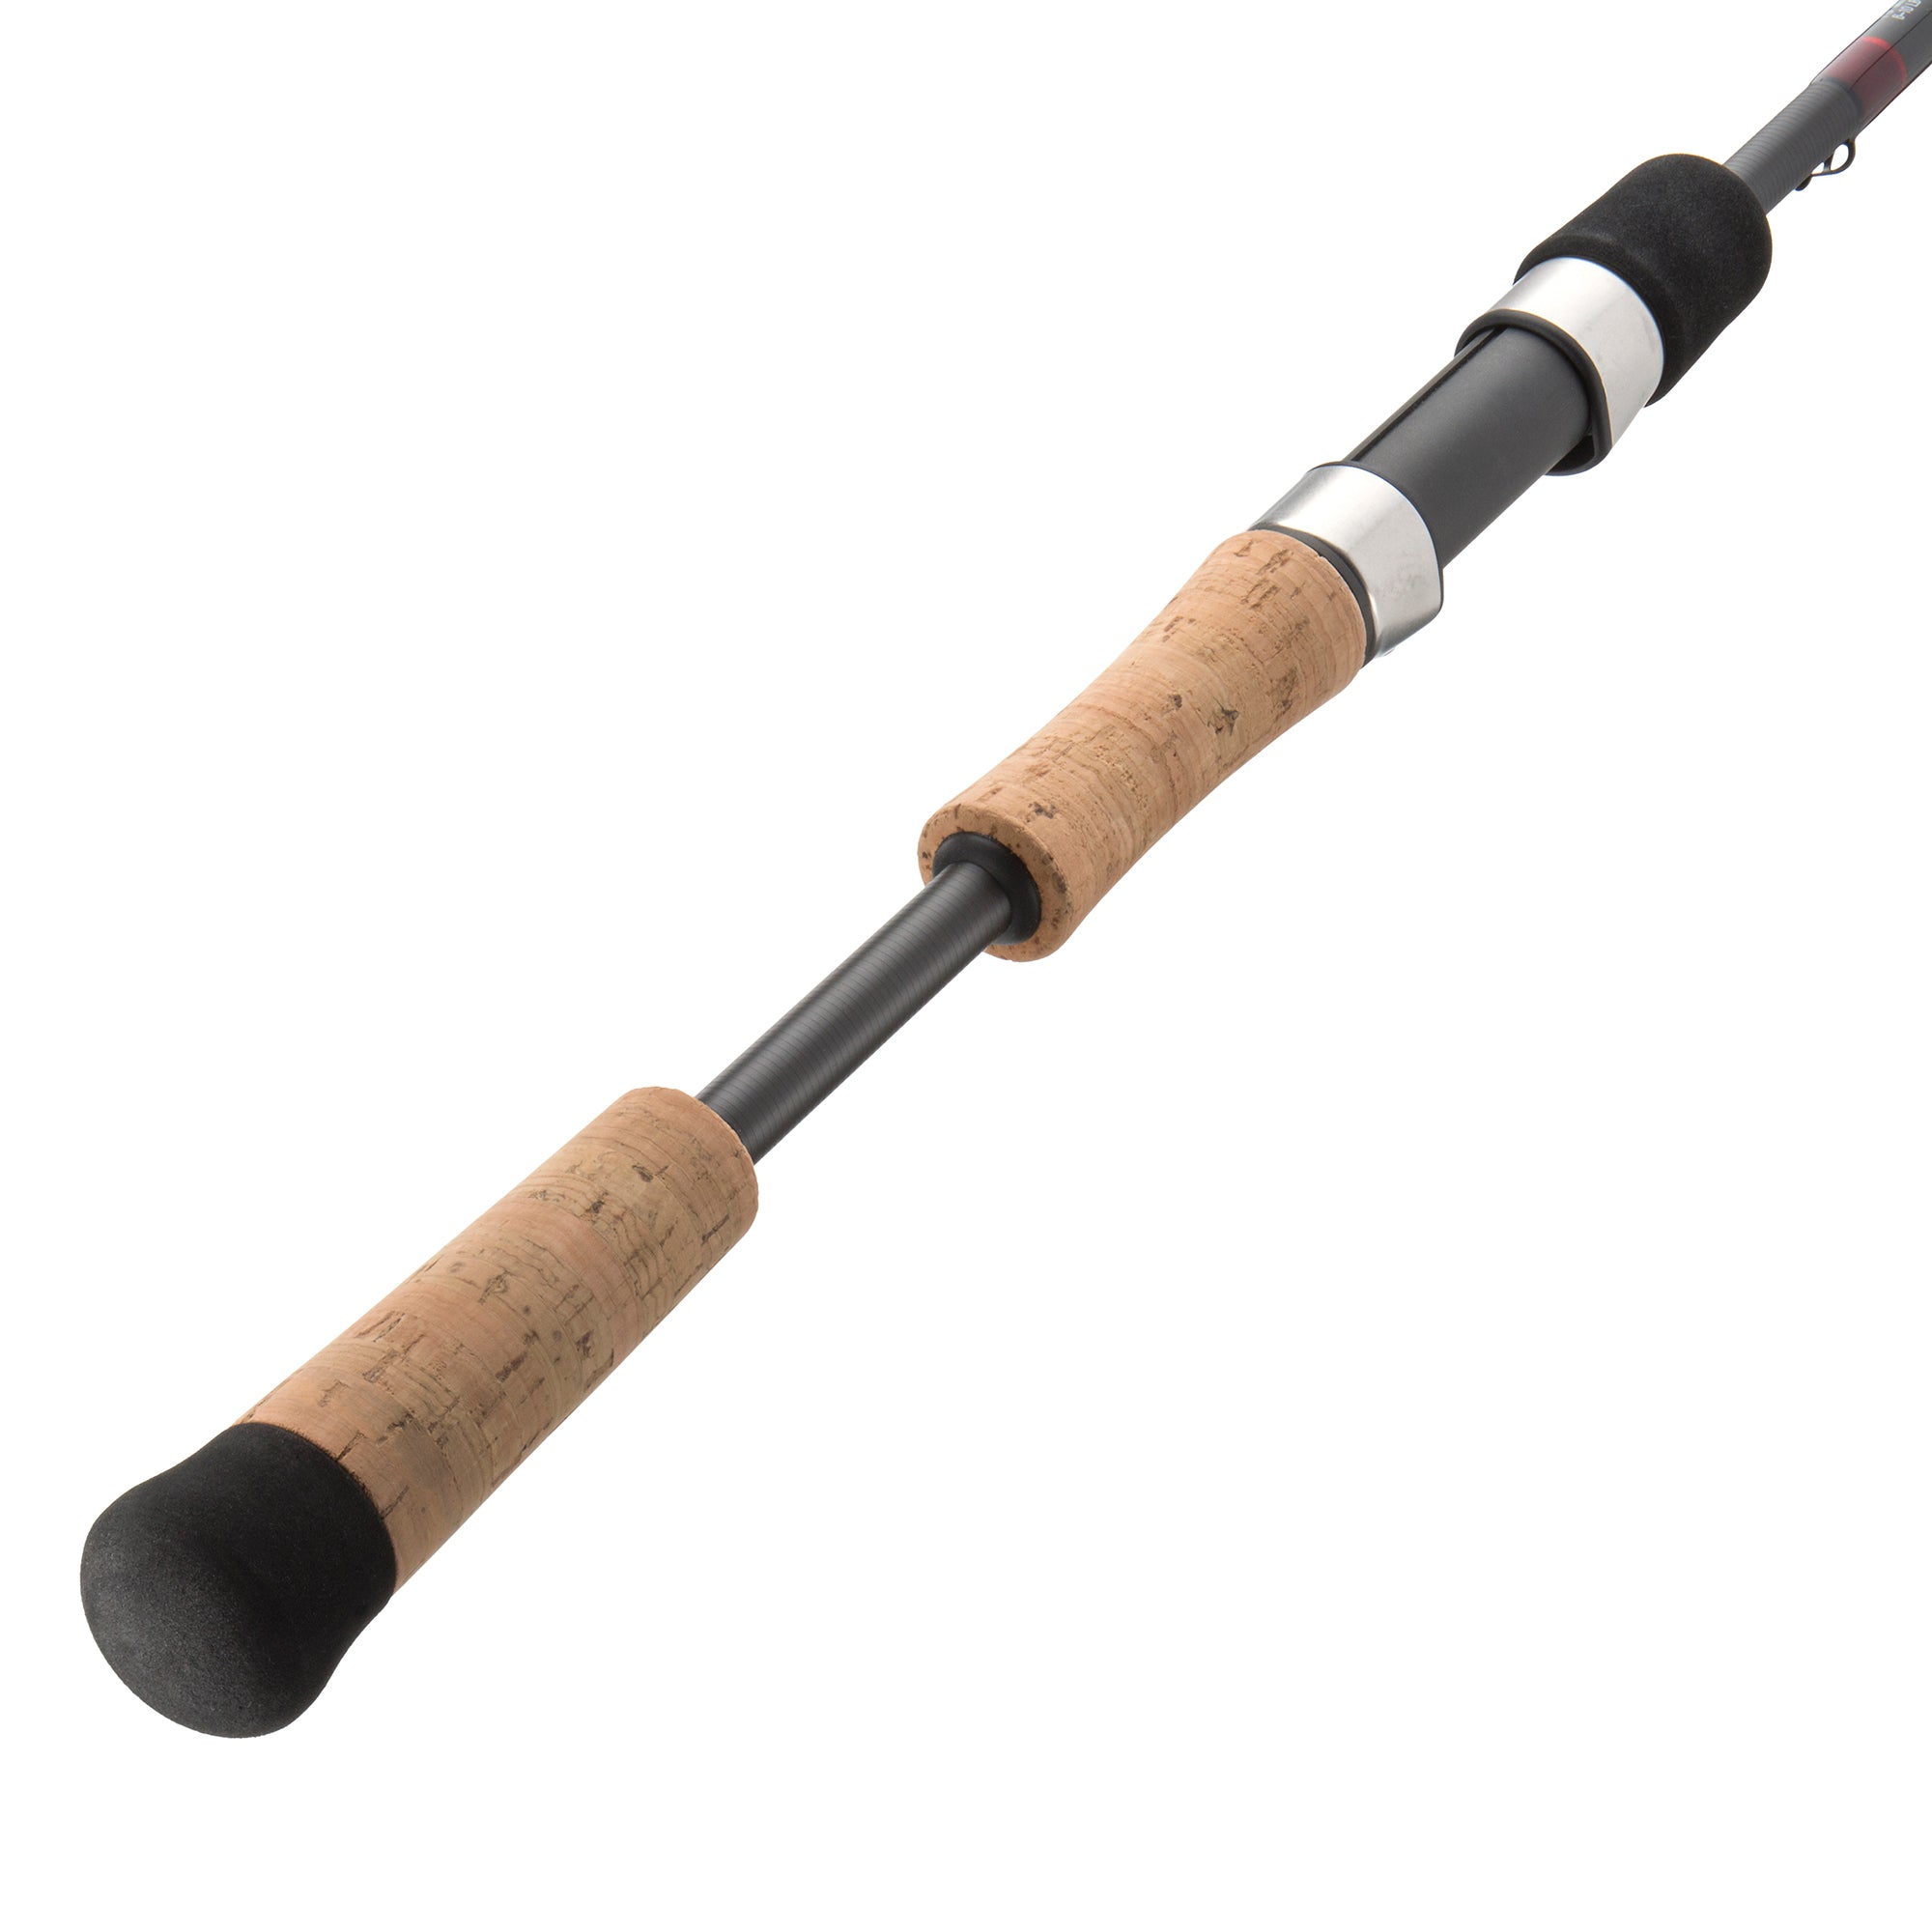 10 Feet Heavy Spinning Fishing Rods for sale